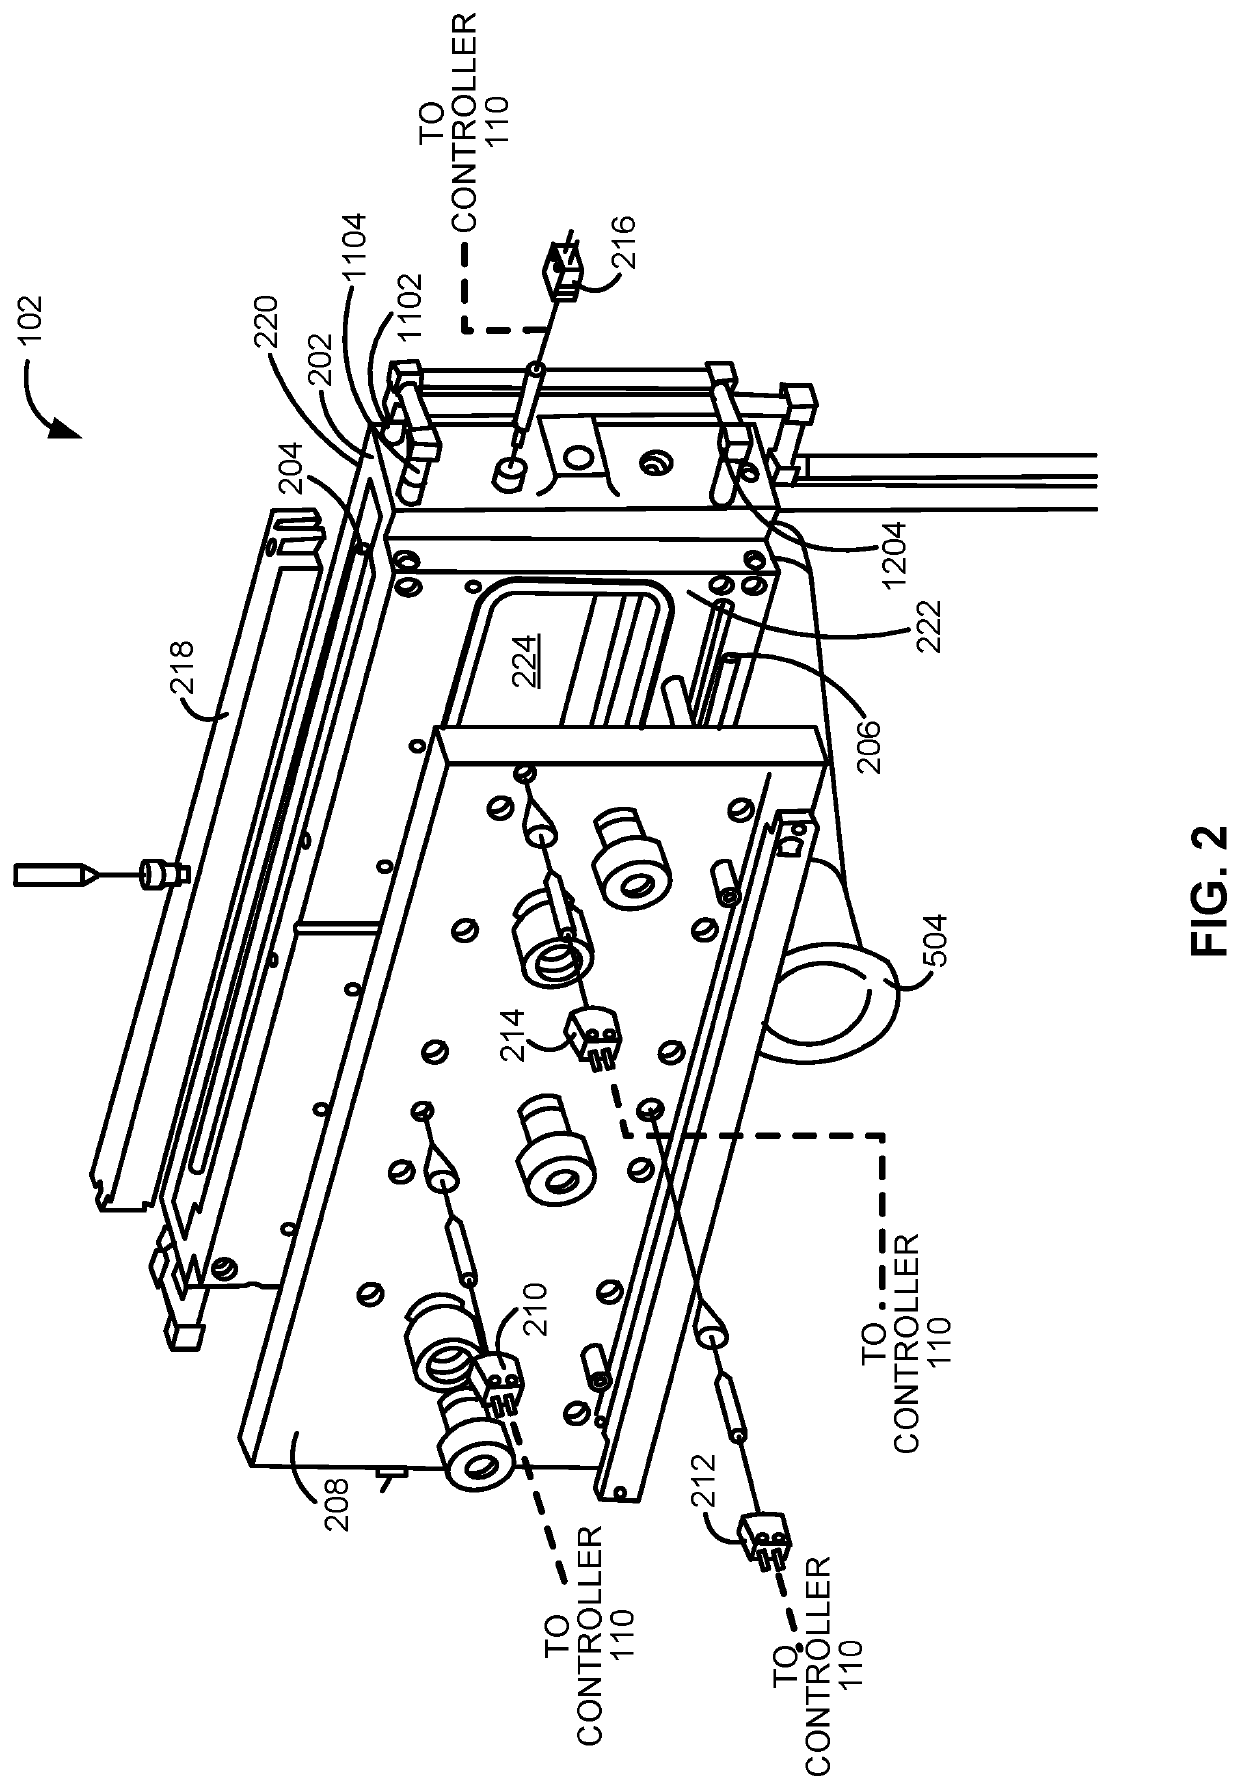 Temperature-controlled flange and reactor system including same